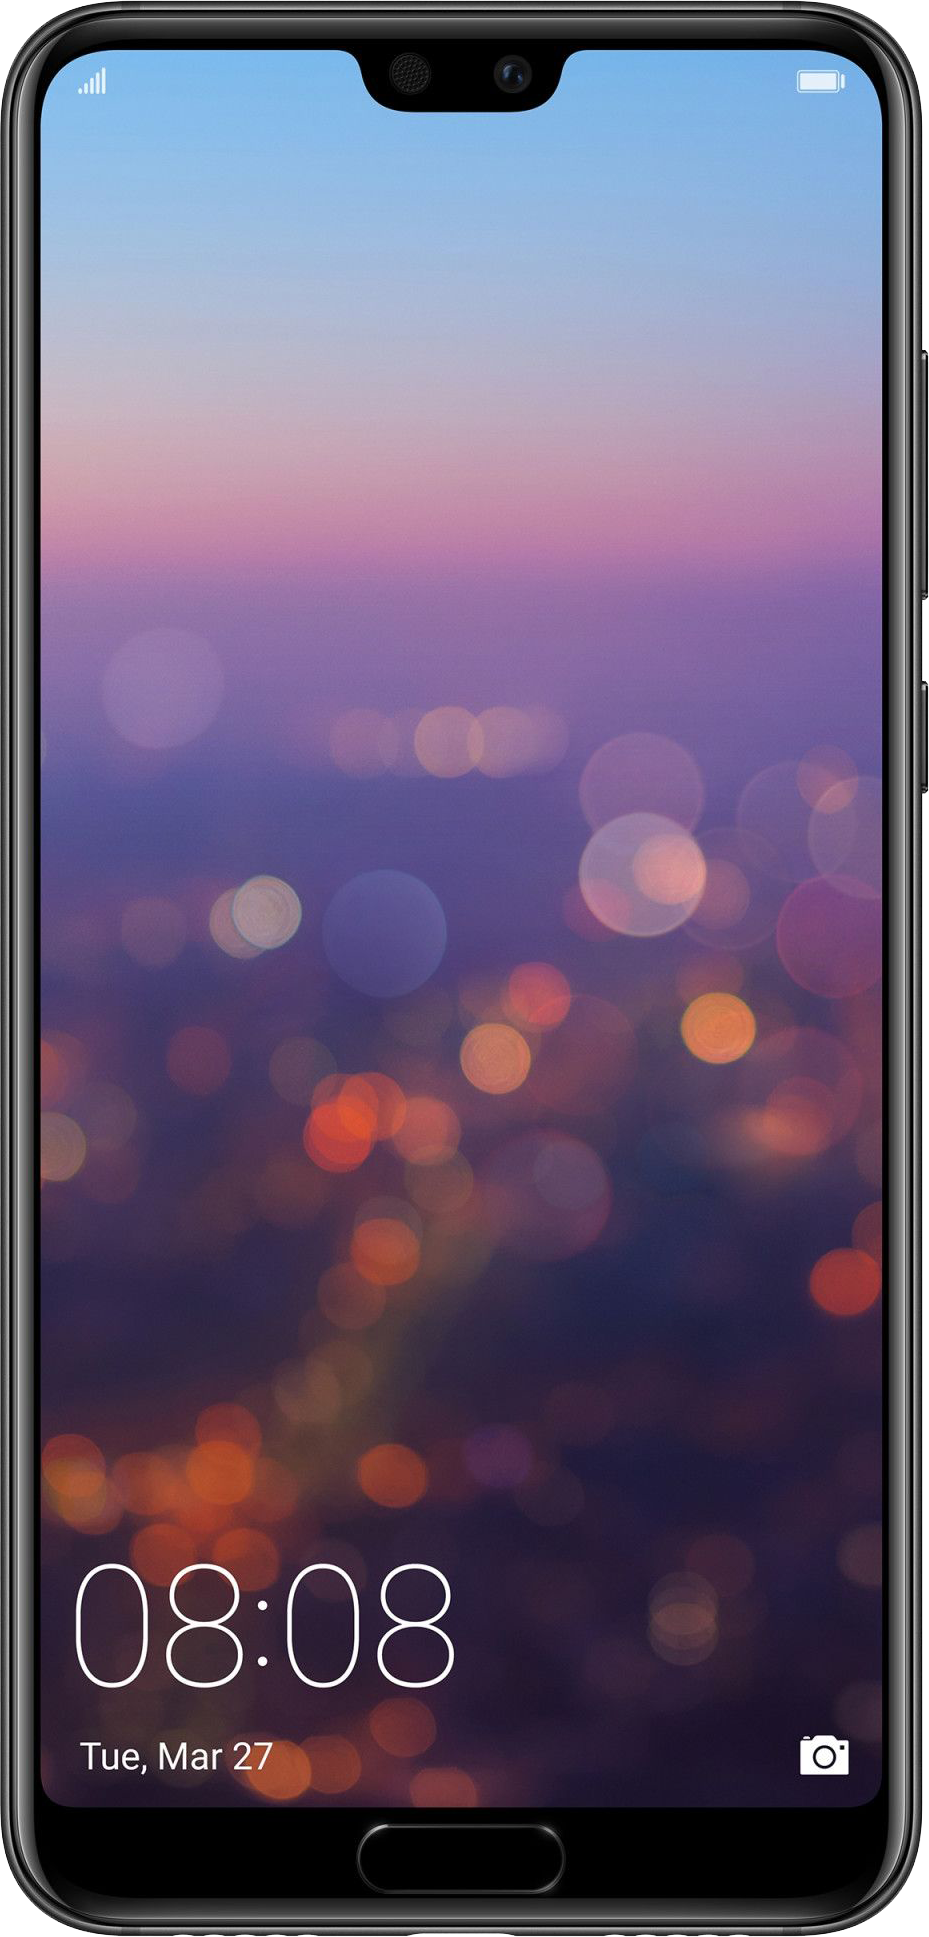 Huawei P20 Pro HW-01K - a supported Huawei model by ChimeraTool